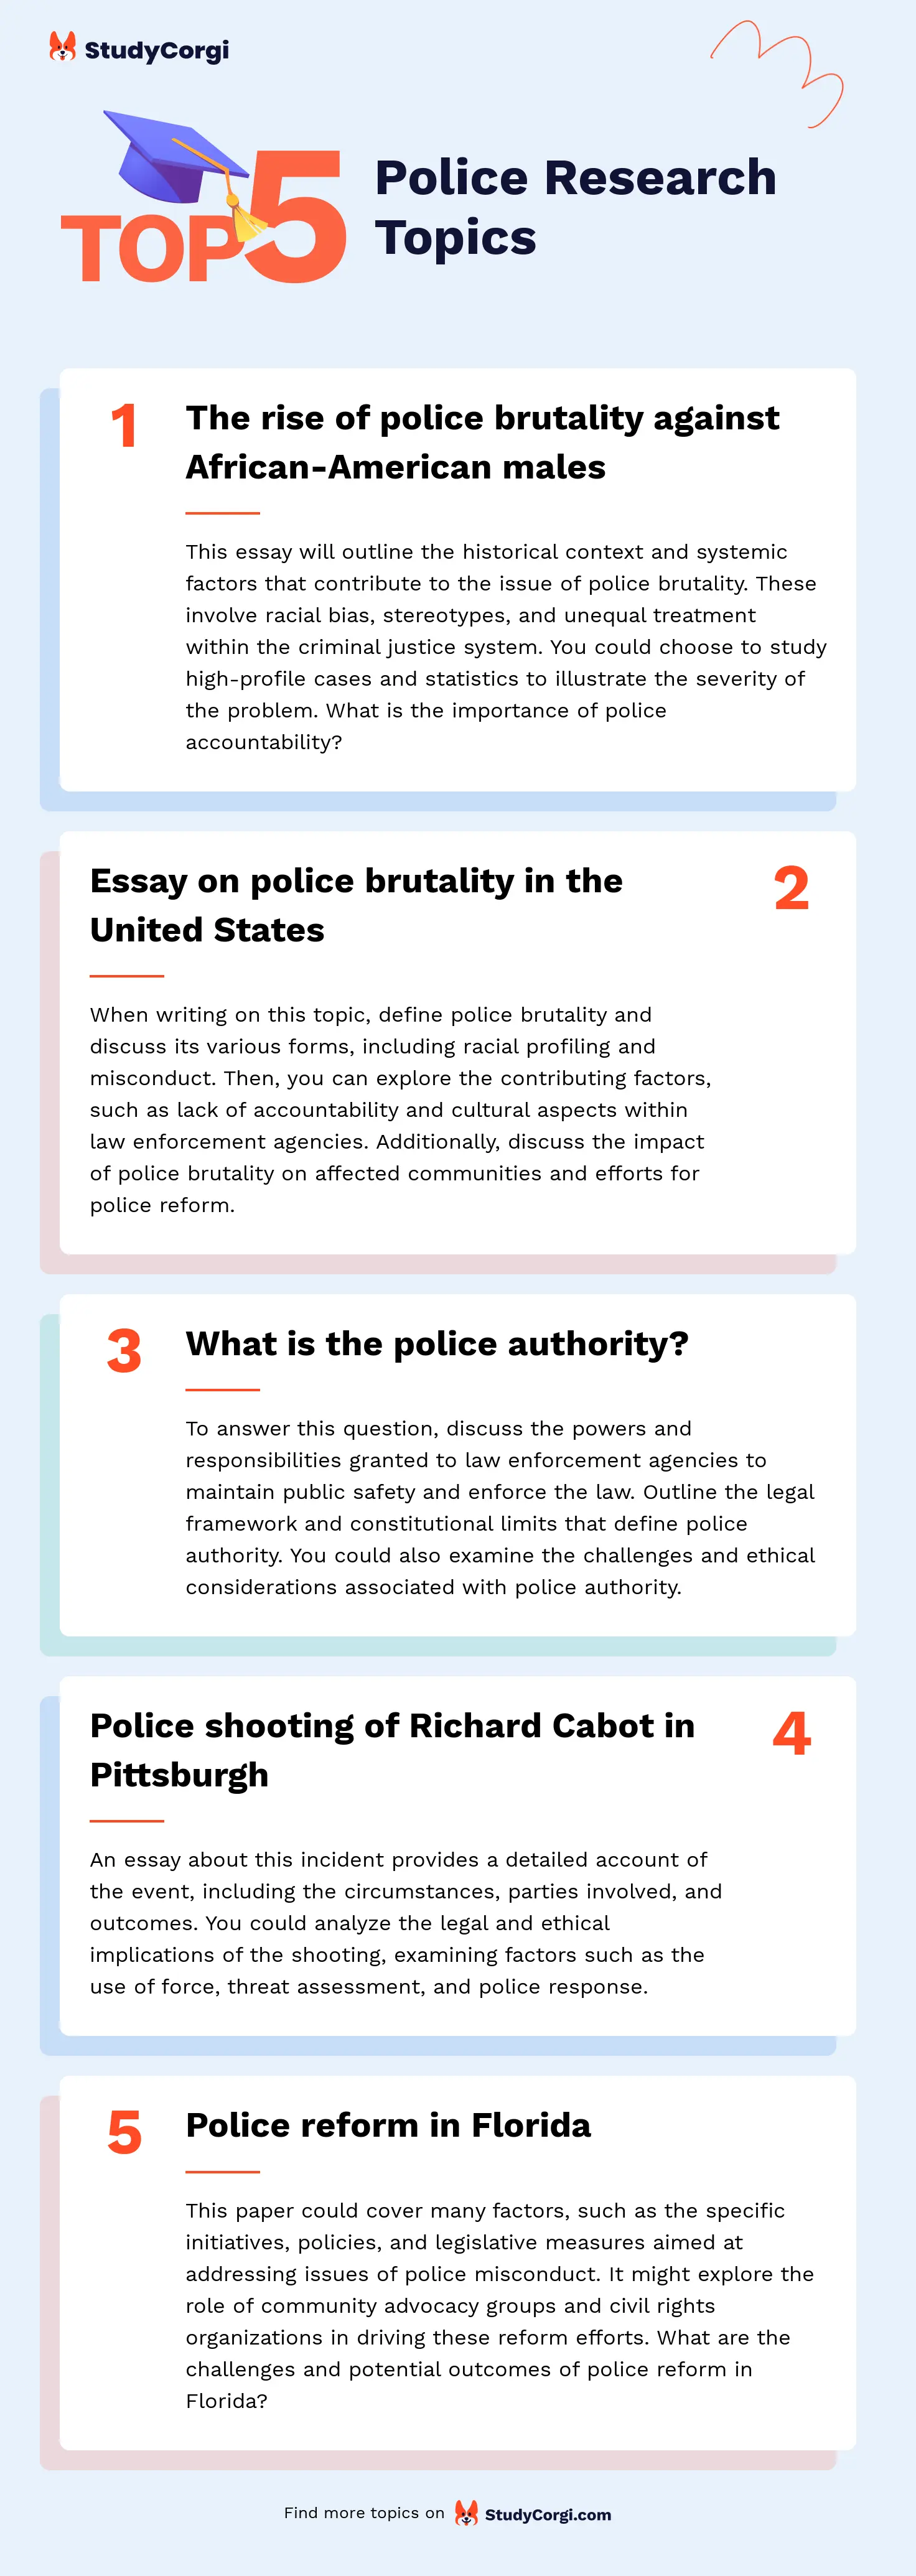 TOP-5 Police Research Topics